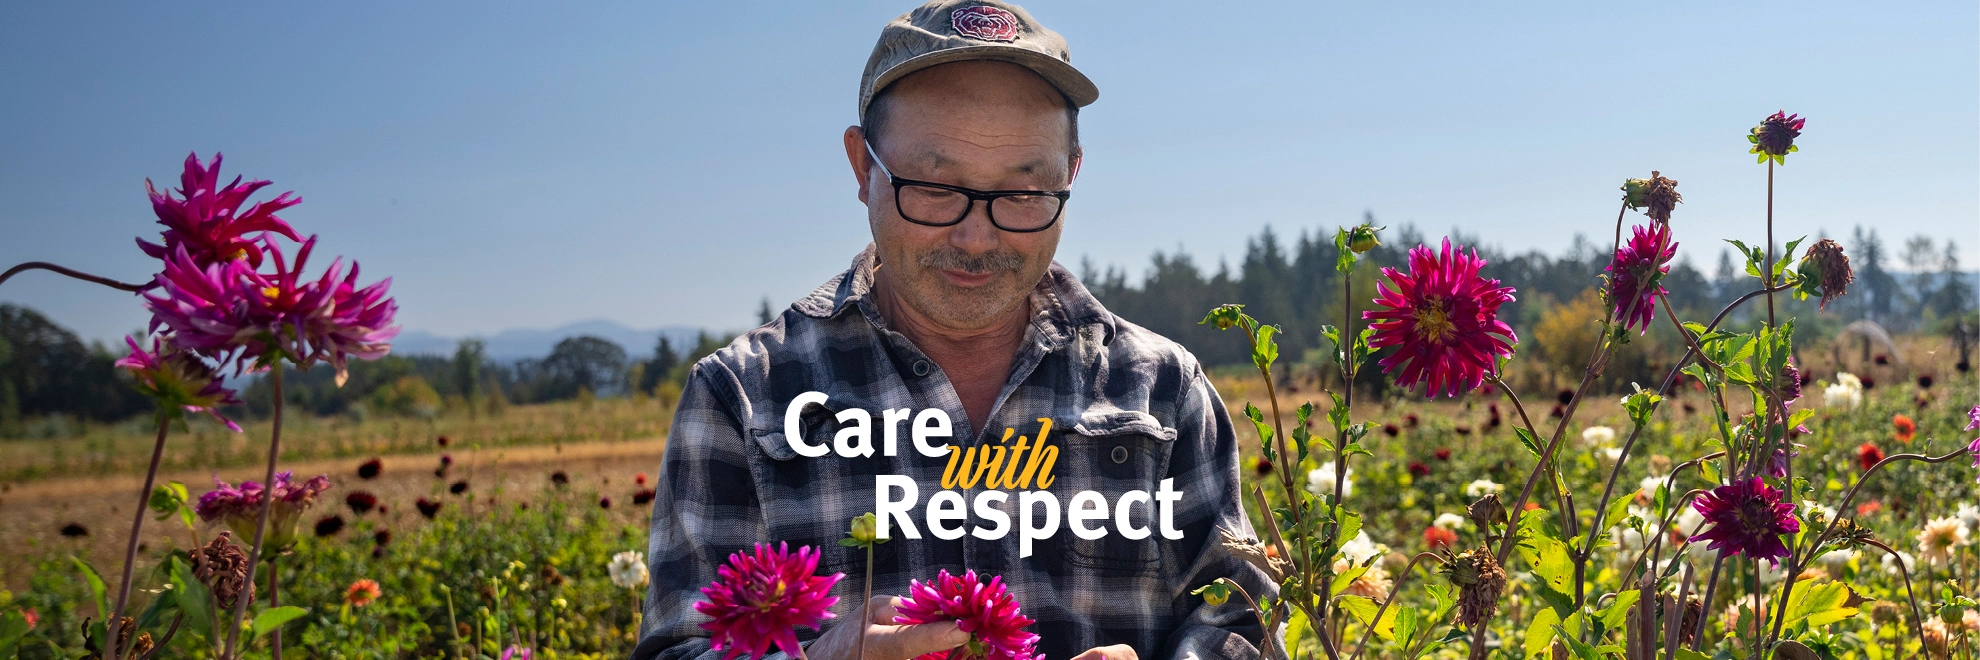 Care with Respect 2022 Christopher in flower field - English